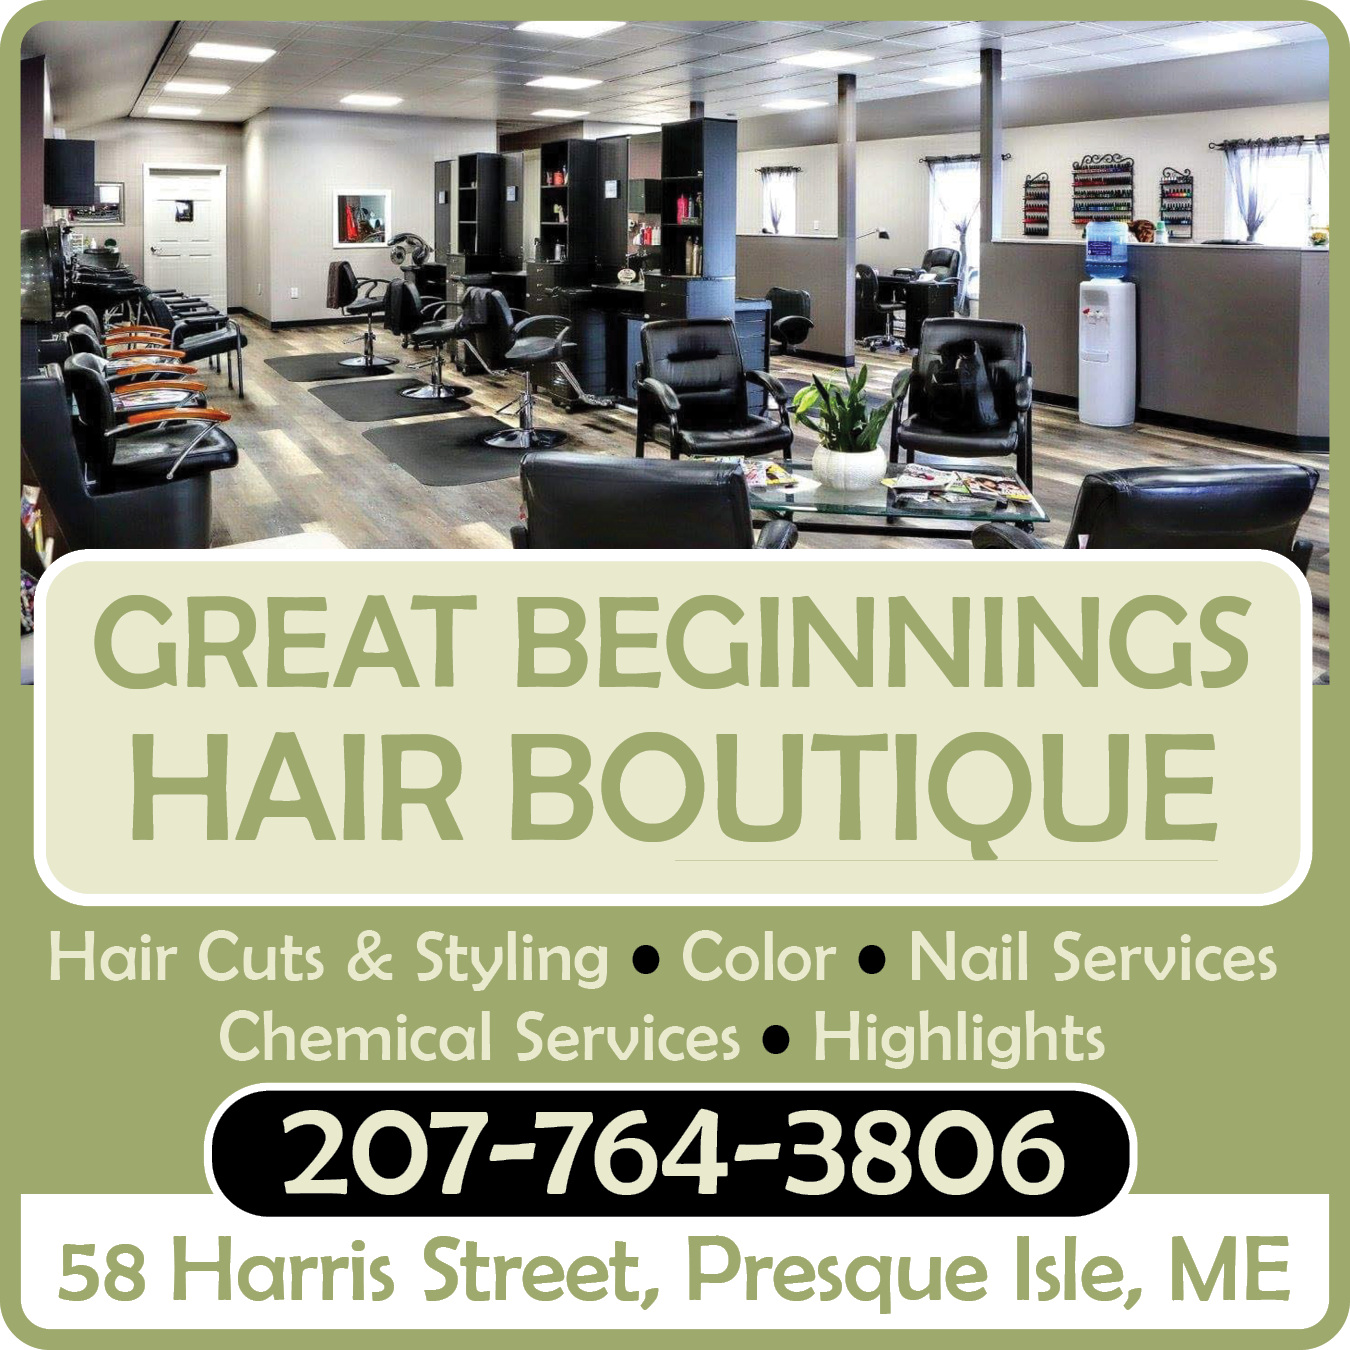 Great Beginnings Hair Boutique